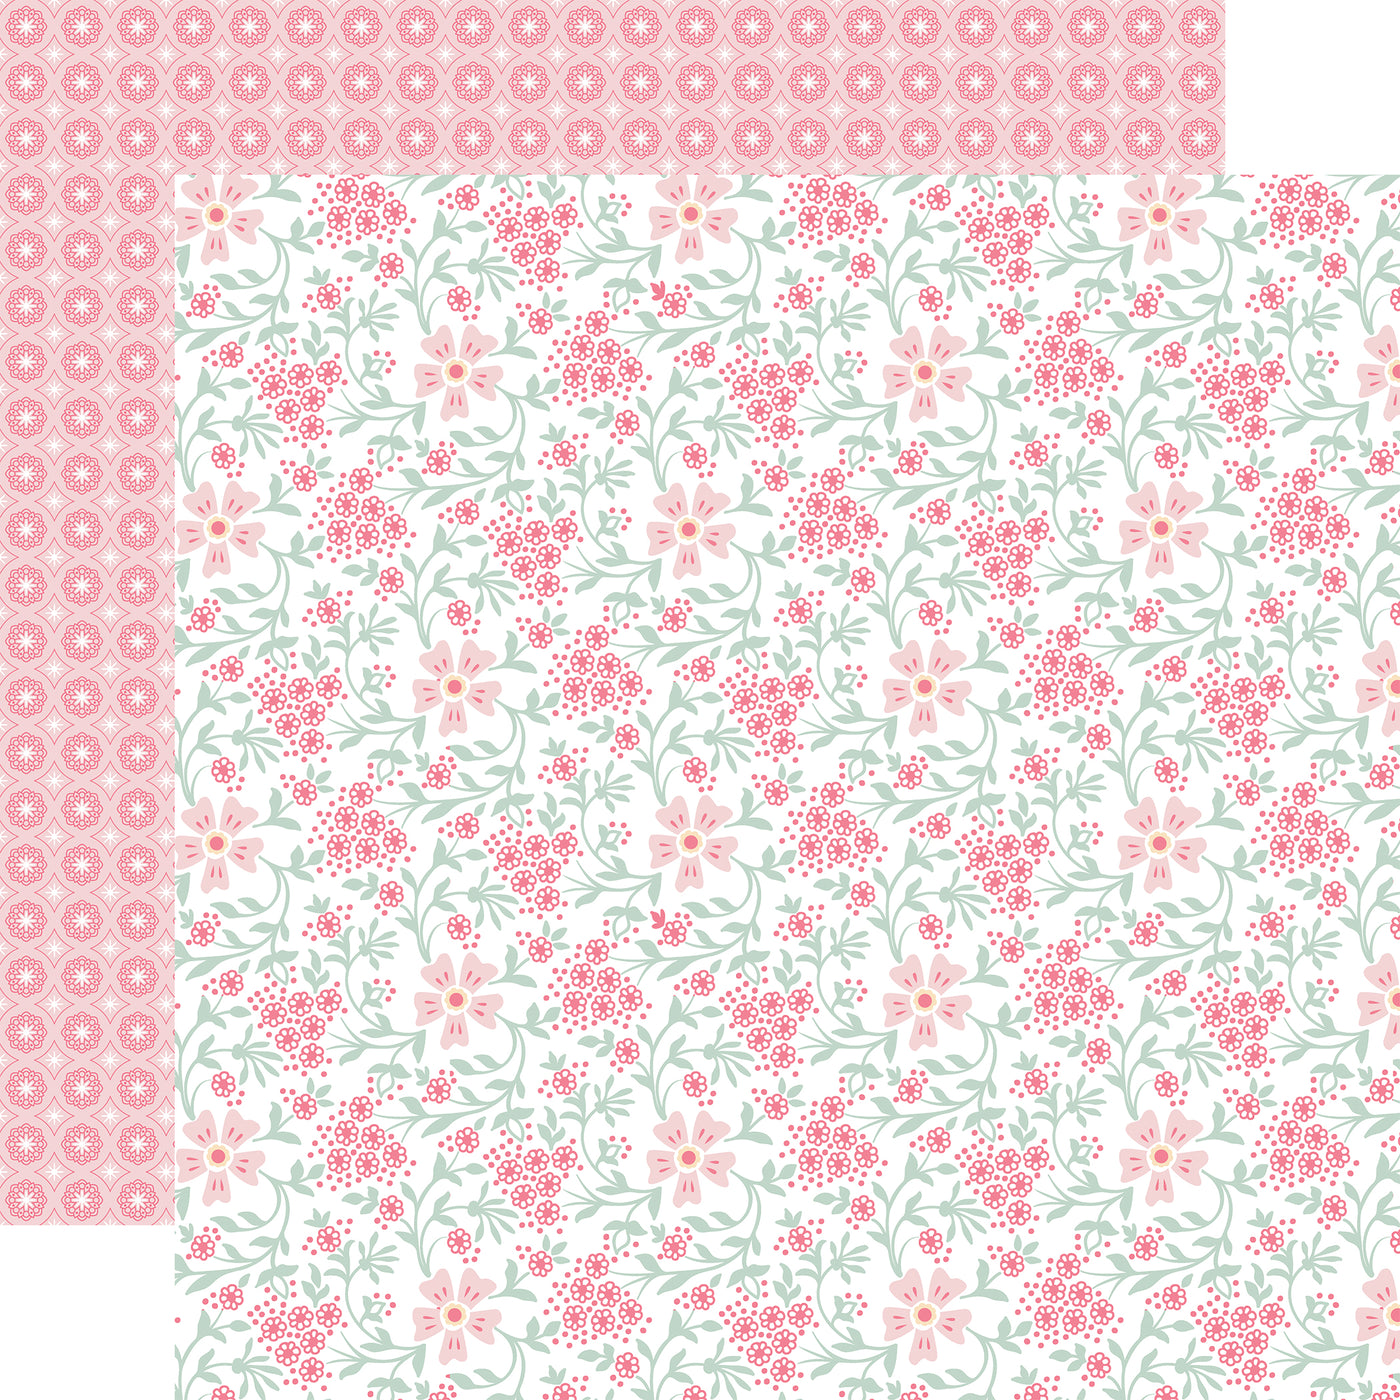 The front side of this paper is filled with pink and dark pink Fairytale Flowers. The reverse side is dark pink and filled with rows of small mandala designs.